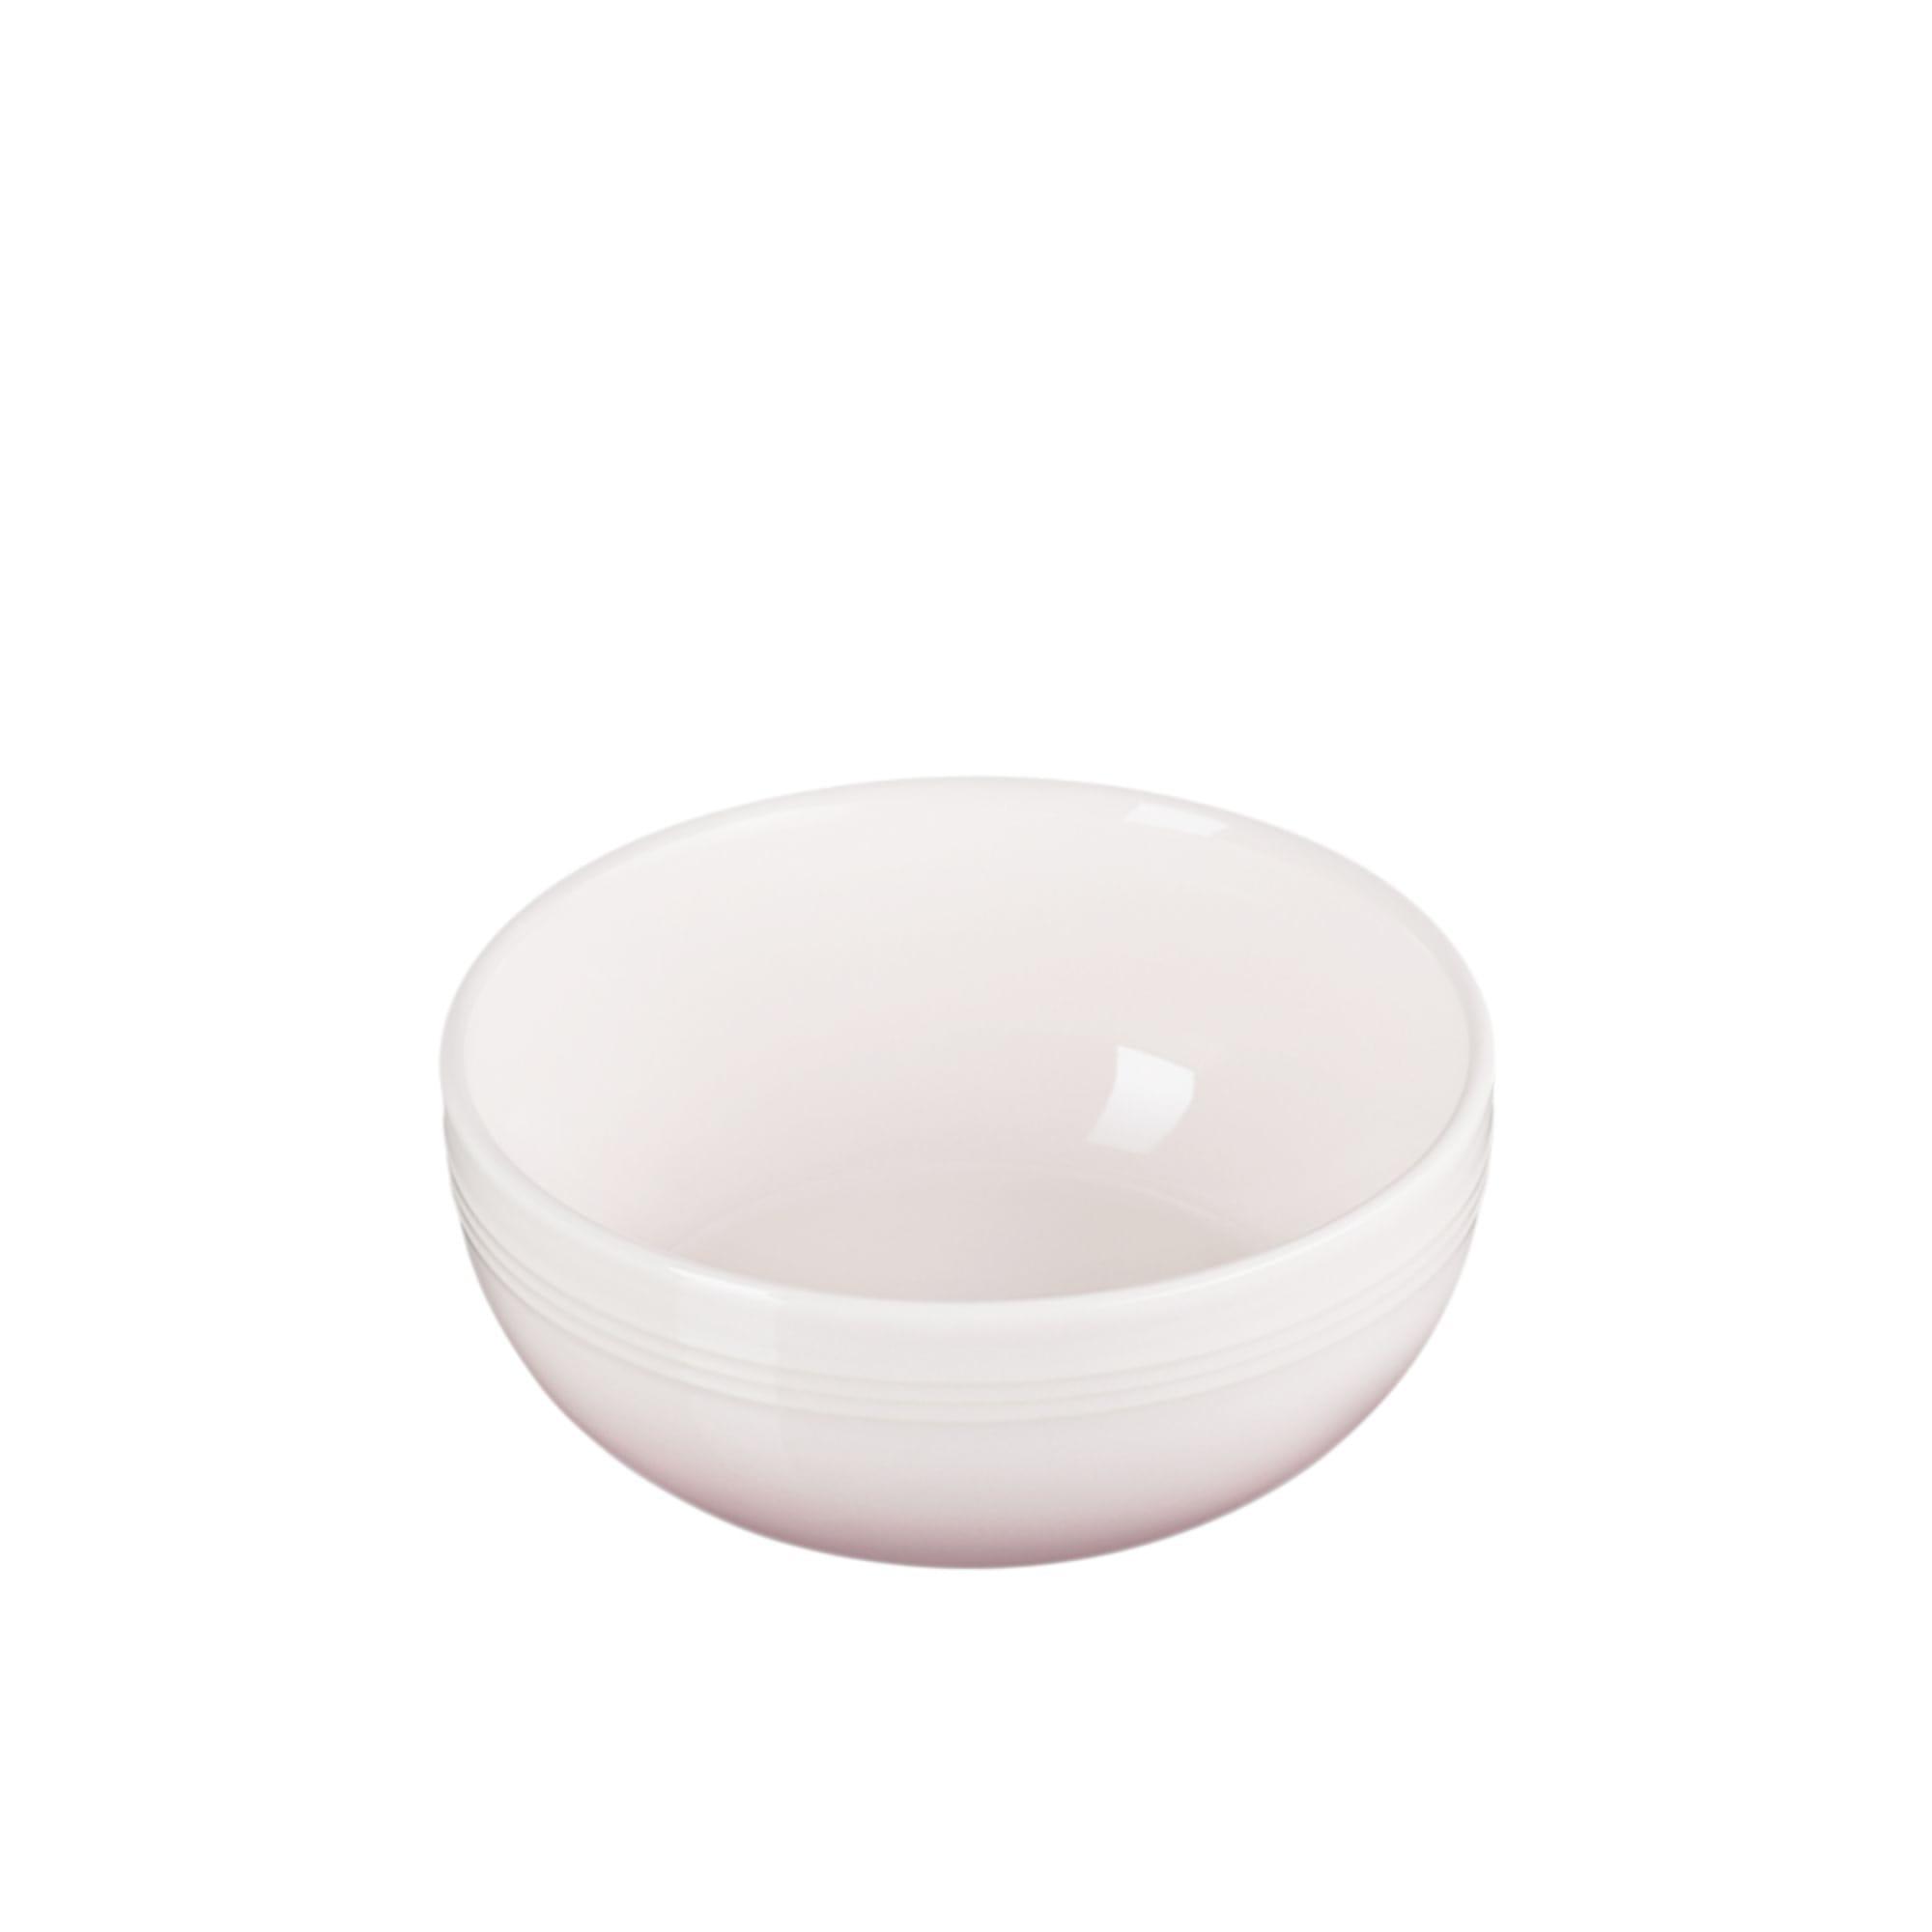 Le Creuset Stoneware Coupe Cereal Bowl 16cm Shell Pink Image 8